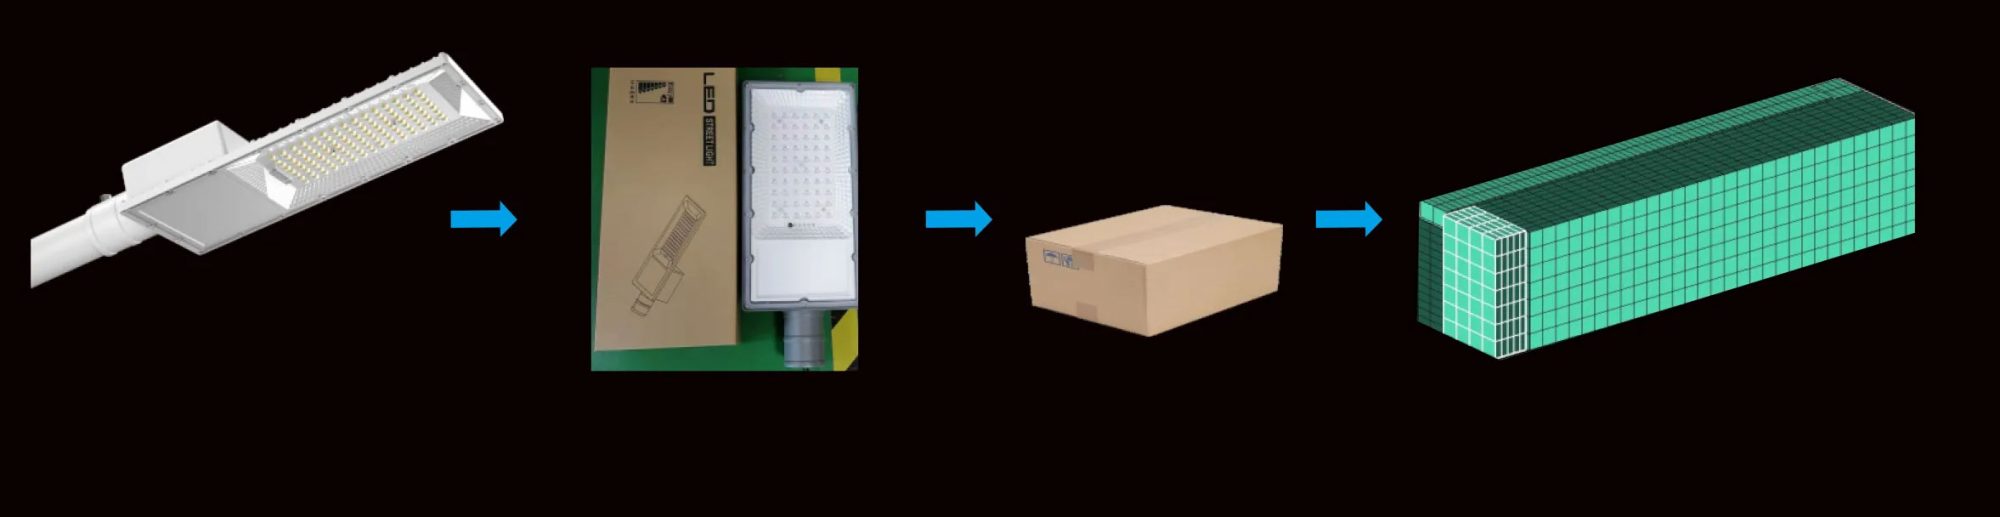 Competitive Price LED Street Light Packing